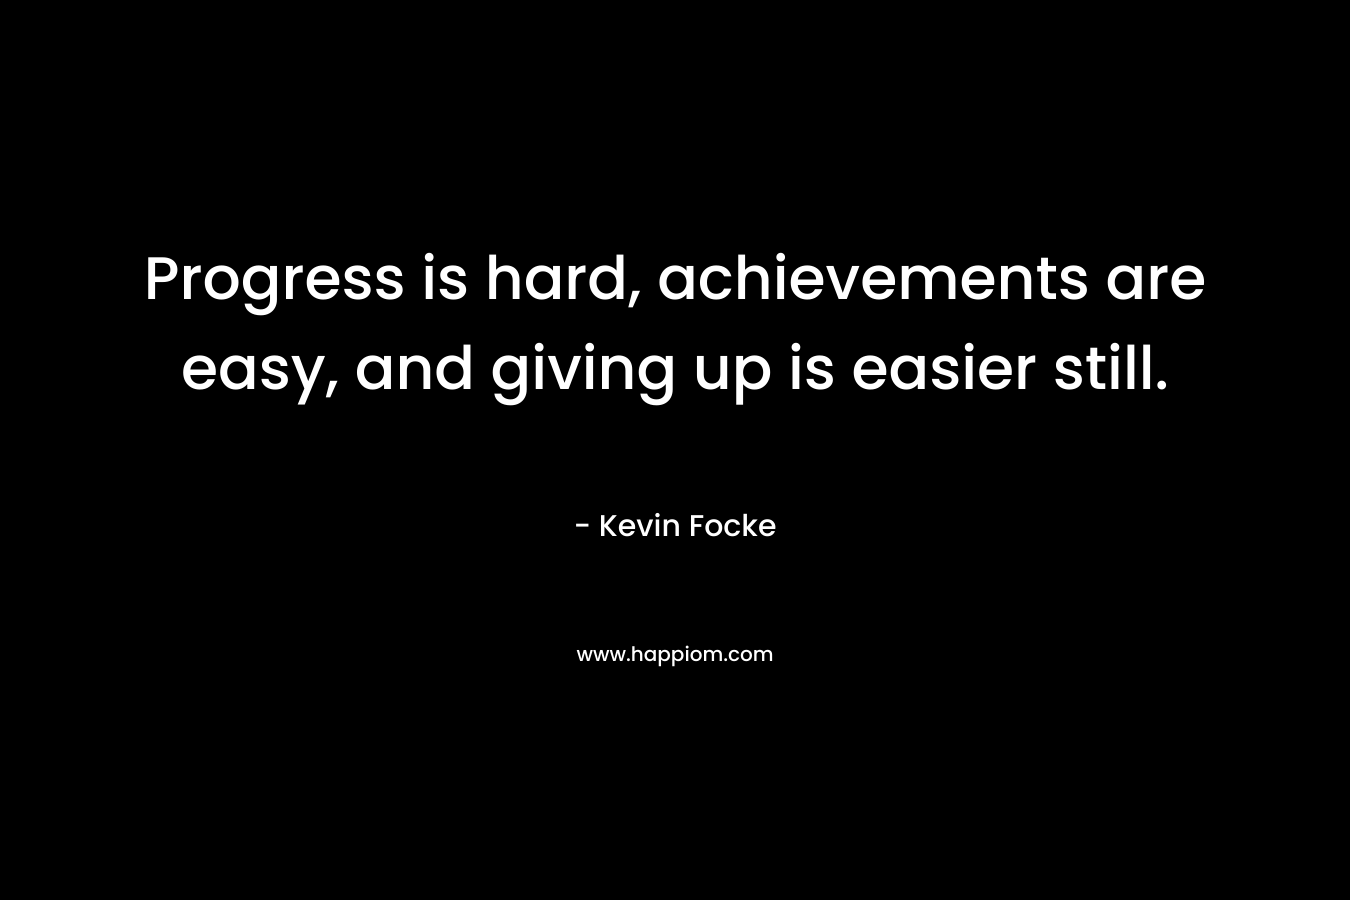 Progress is hard, achievements are easy, and giving up is easier still.